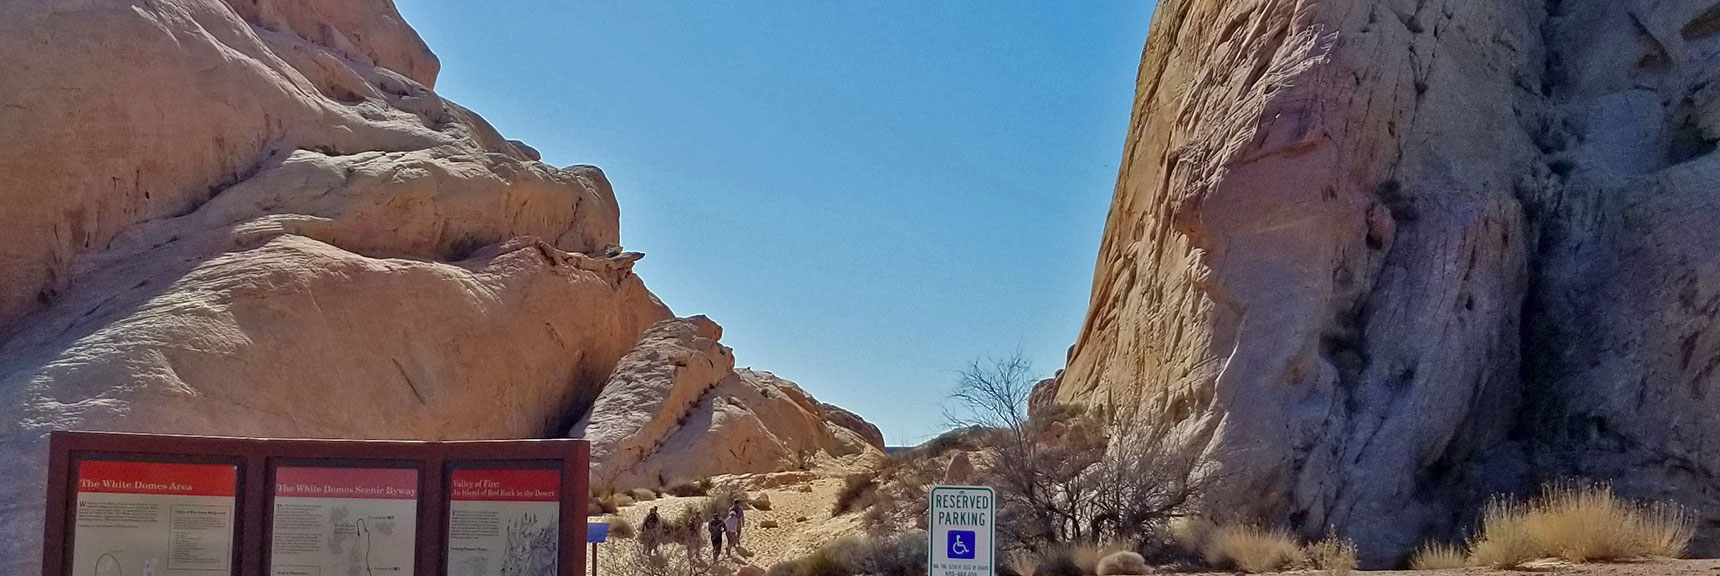 Parking Area at the Beginning of White Domes Loop Trail in Valley of Fire State Park, Nevada